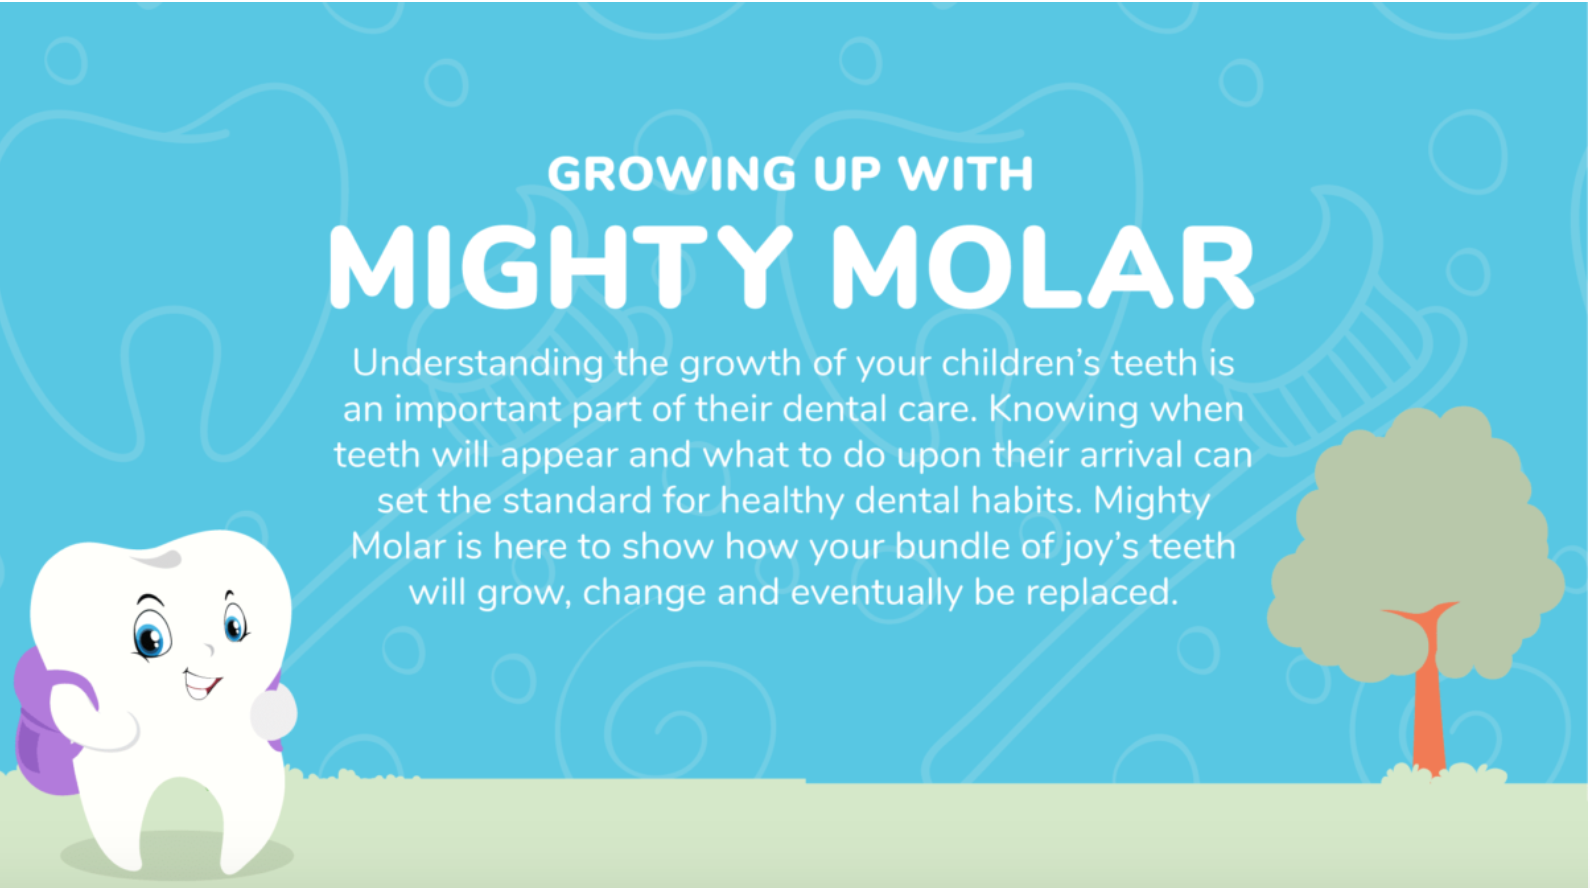 Featured image for “Growing Up With Mighty Molar”